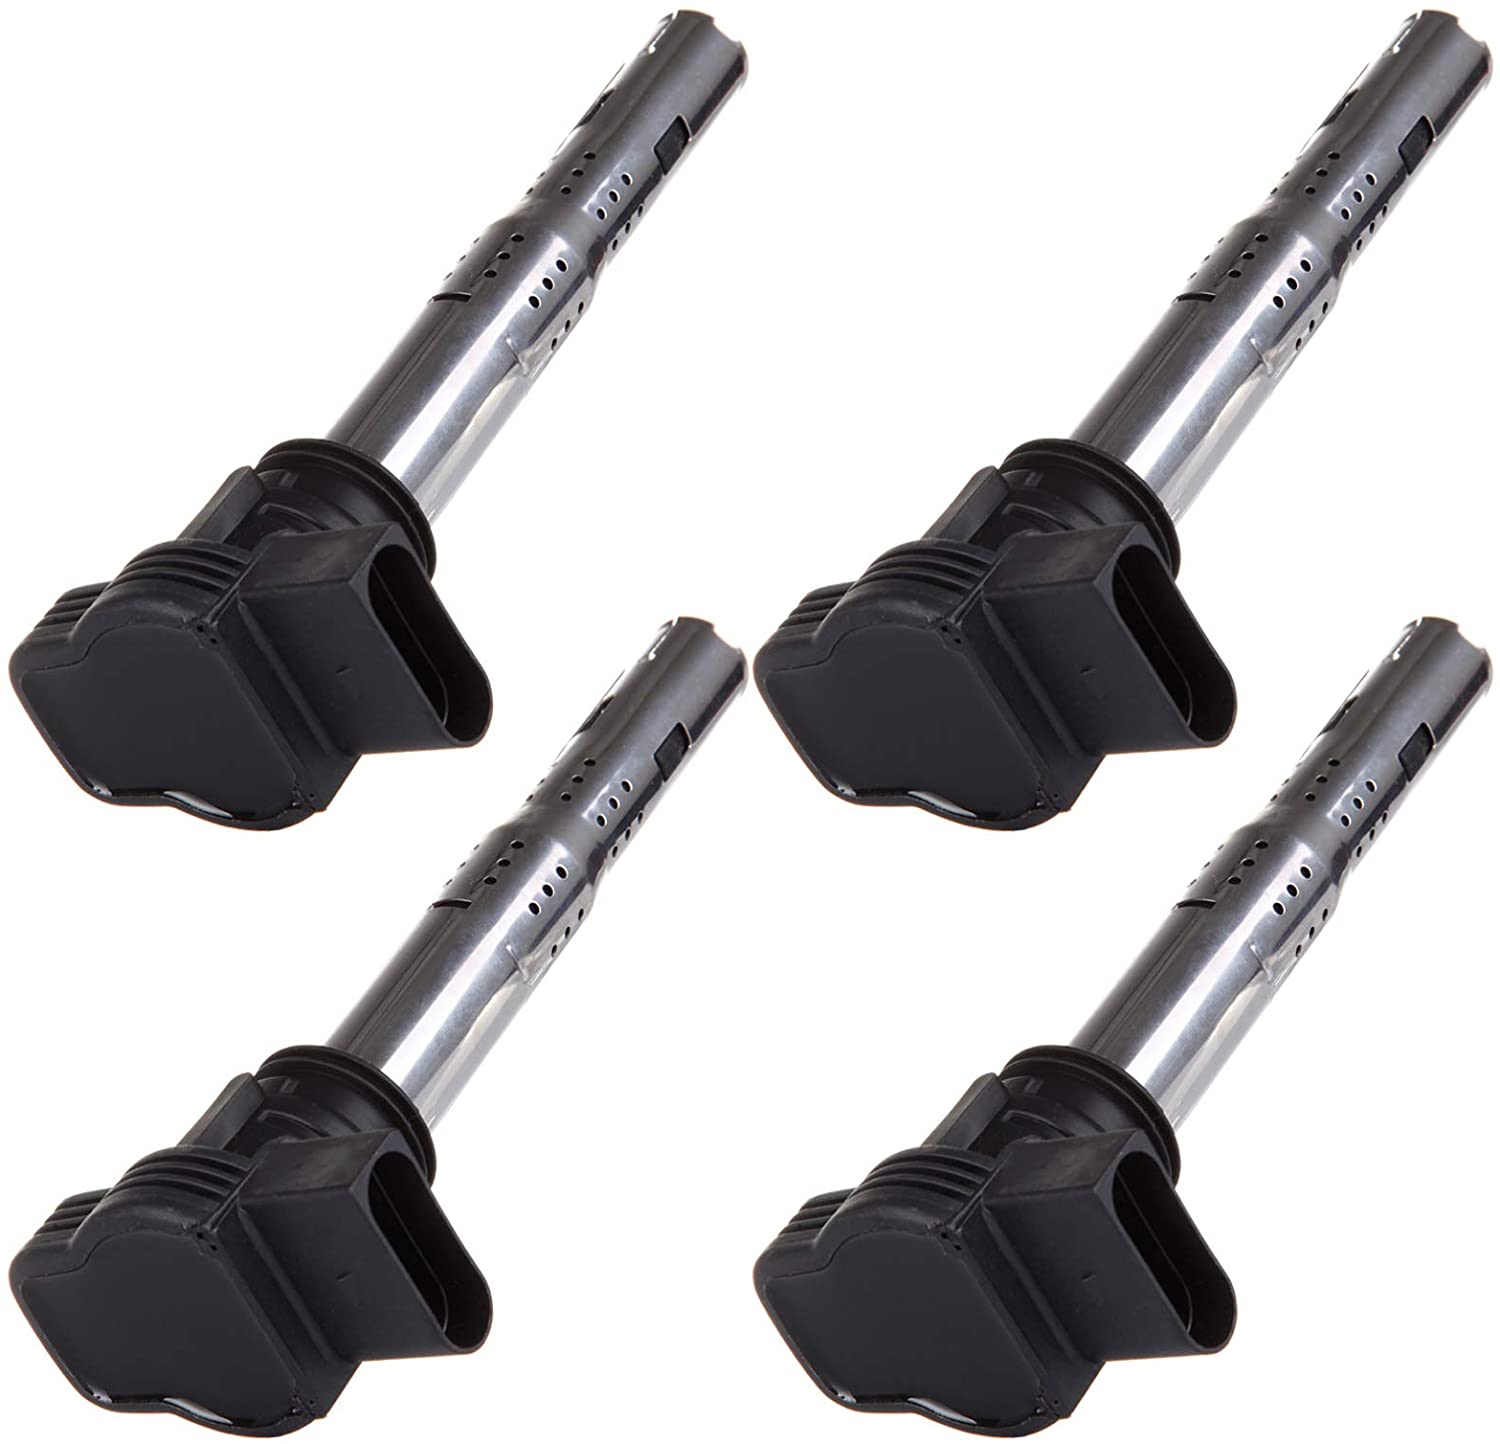 ROADFAR Pack of 4 Ignition Coils Fit for Audi Volkswagen 2005-2012 Equivalent with OE: UF575 UF-575 C1627